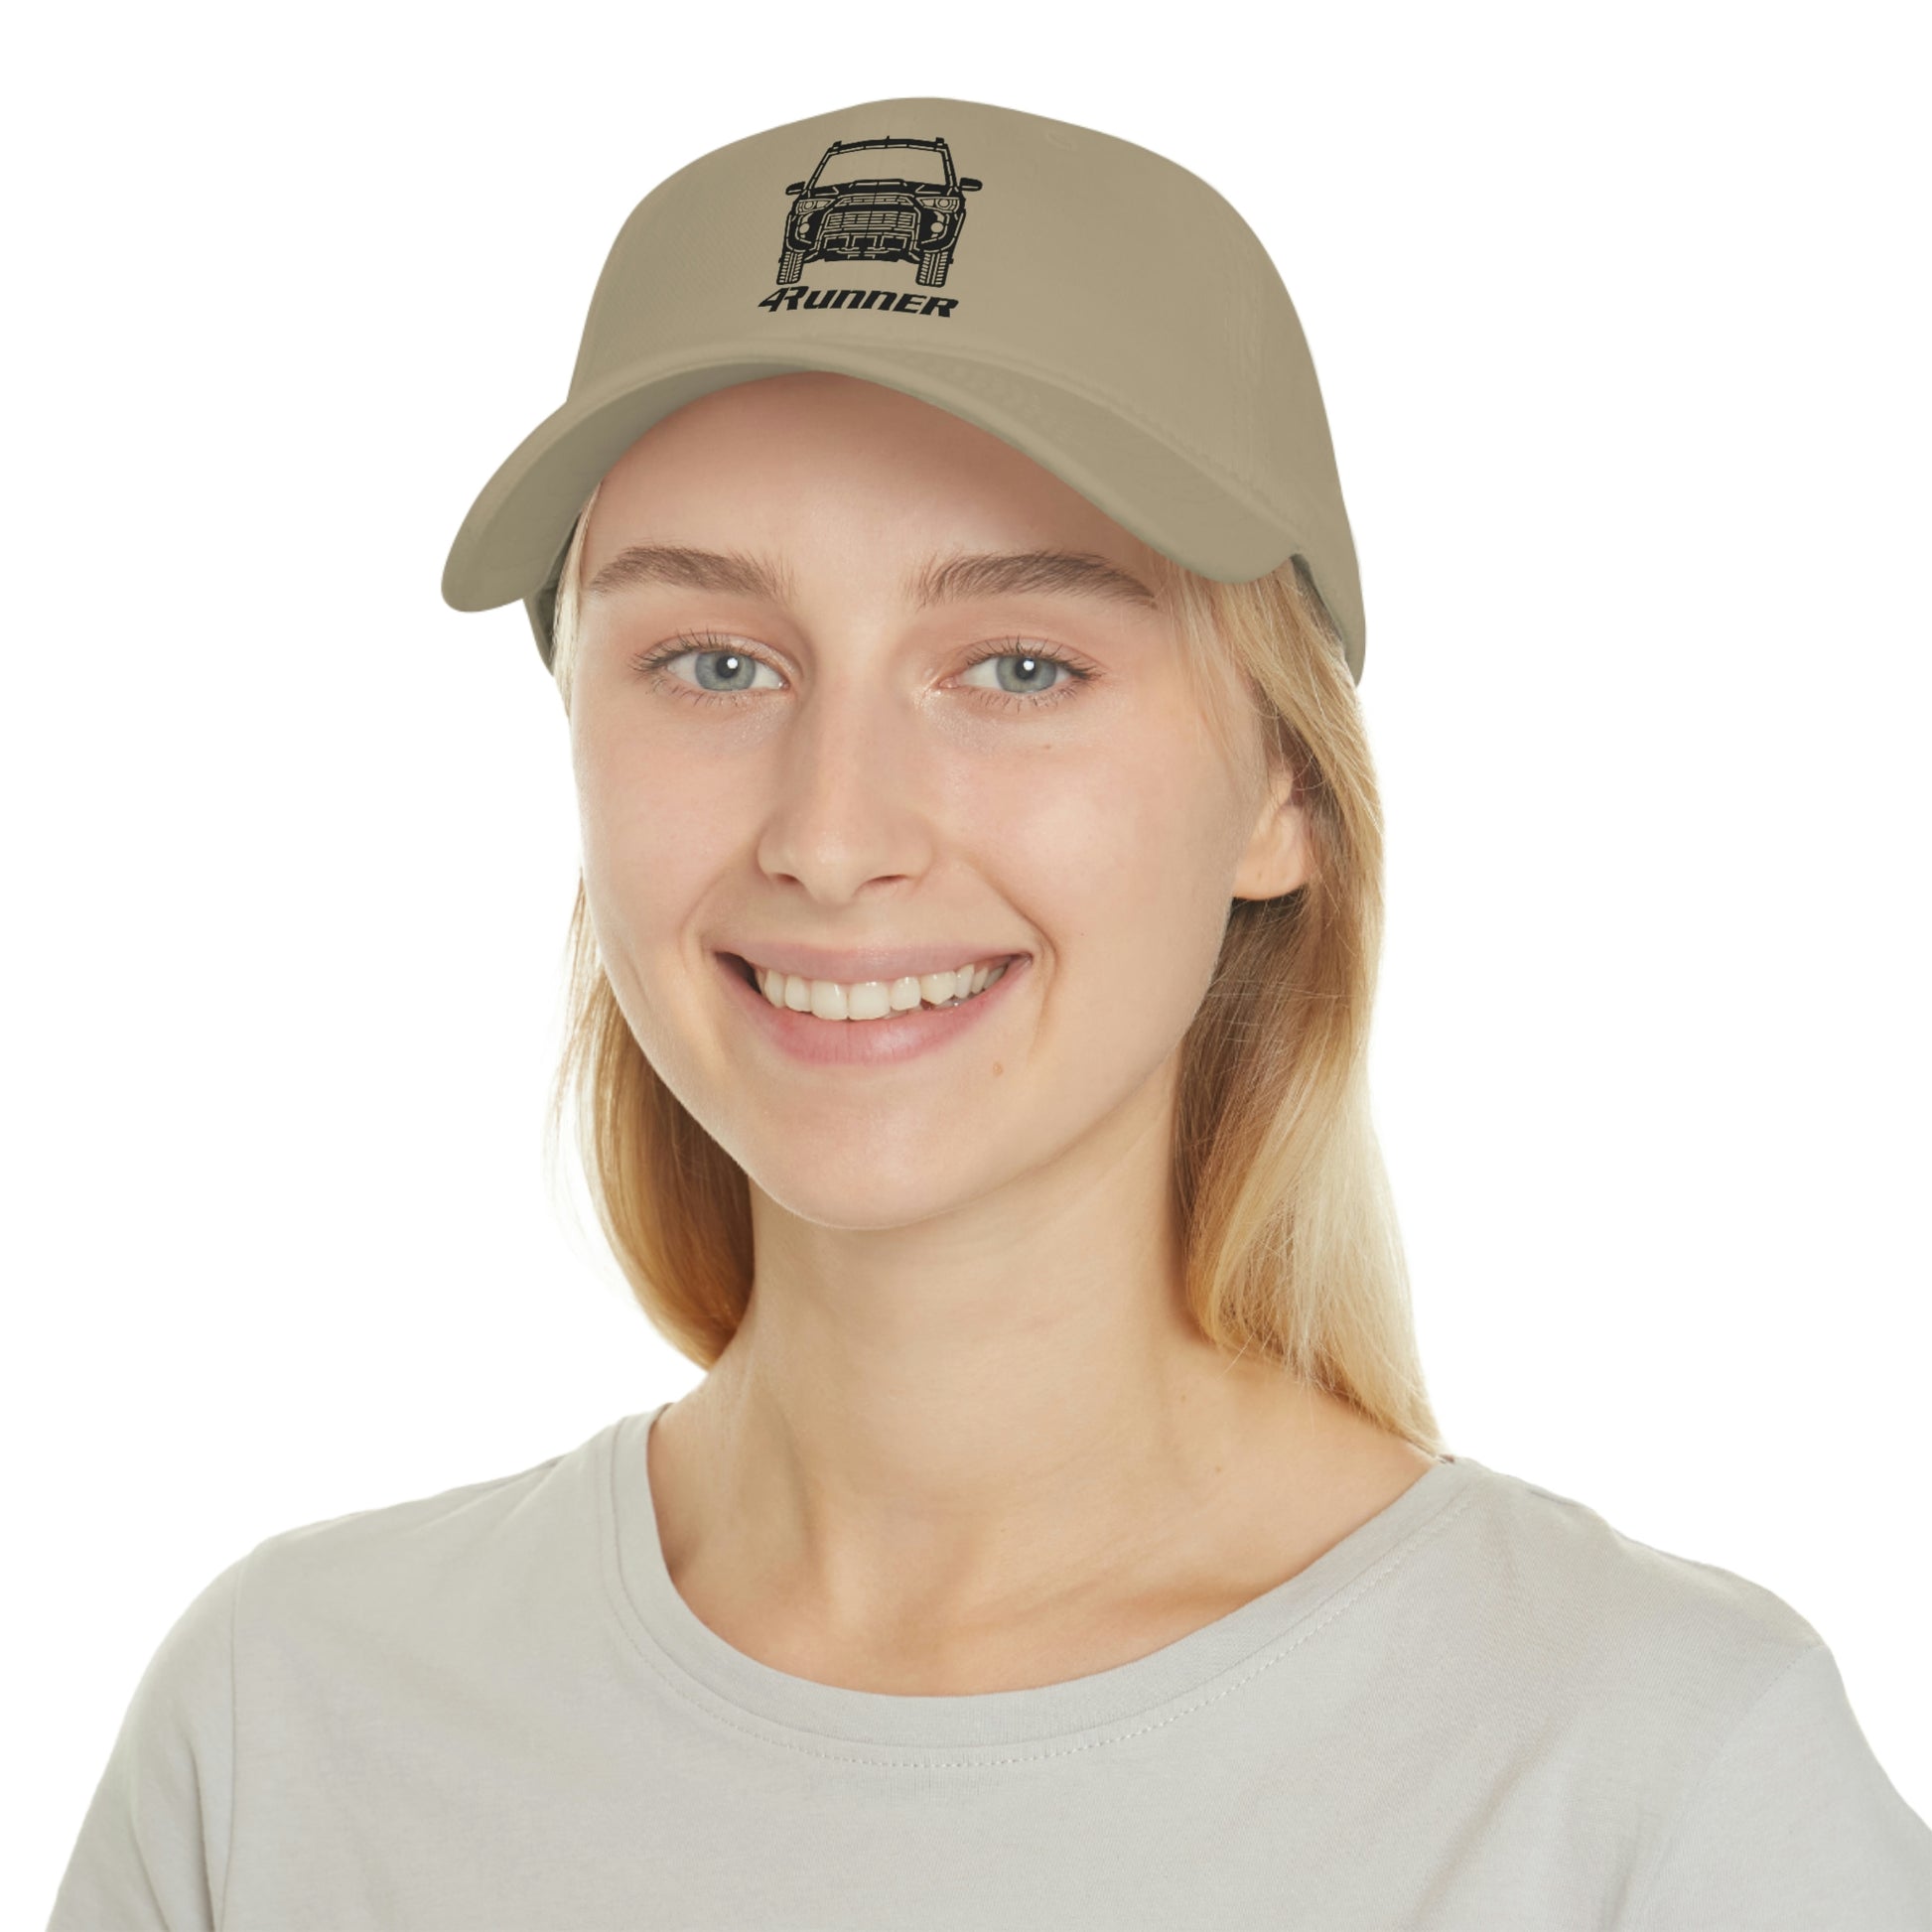 Thrashed Off-Road Abstract 4Runner Hat - Mid-Atlantic Off-Roading